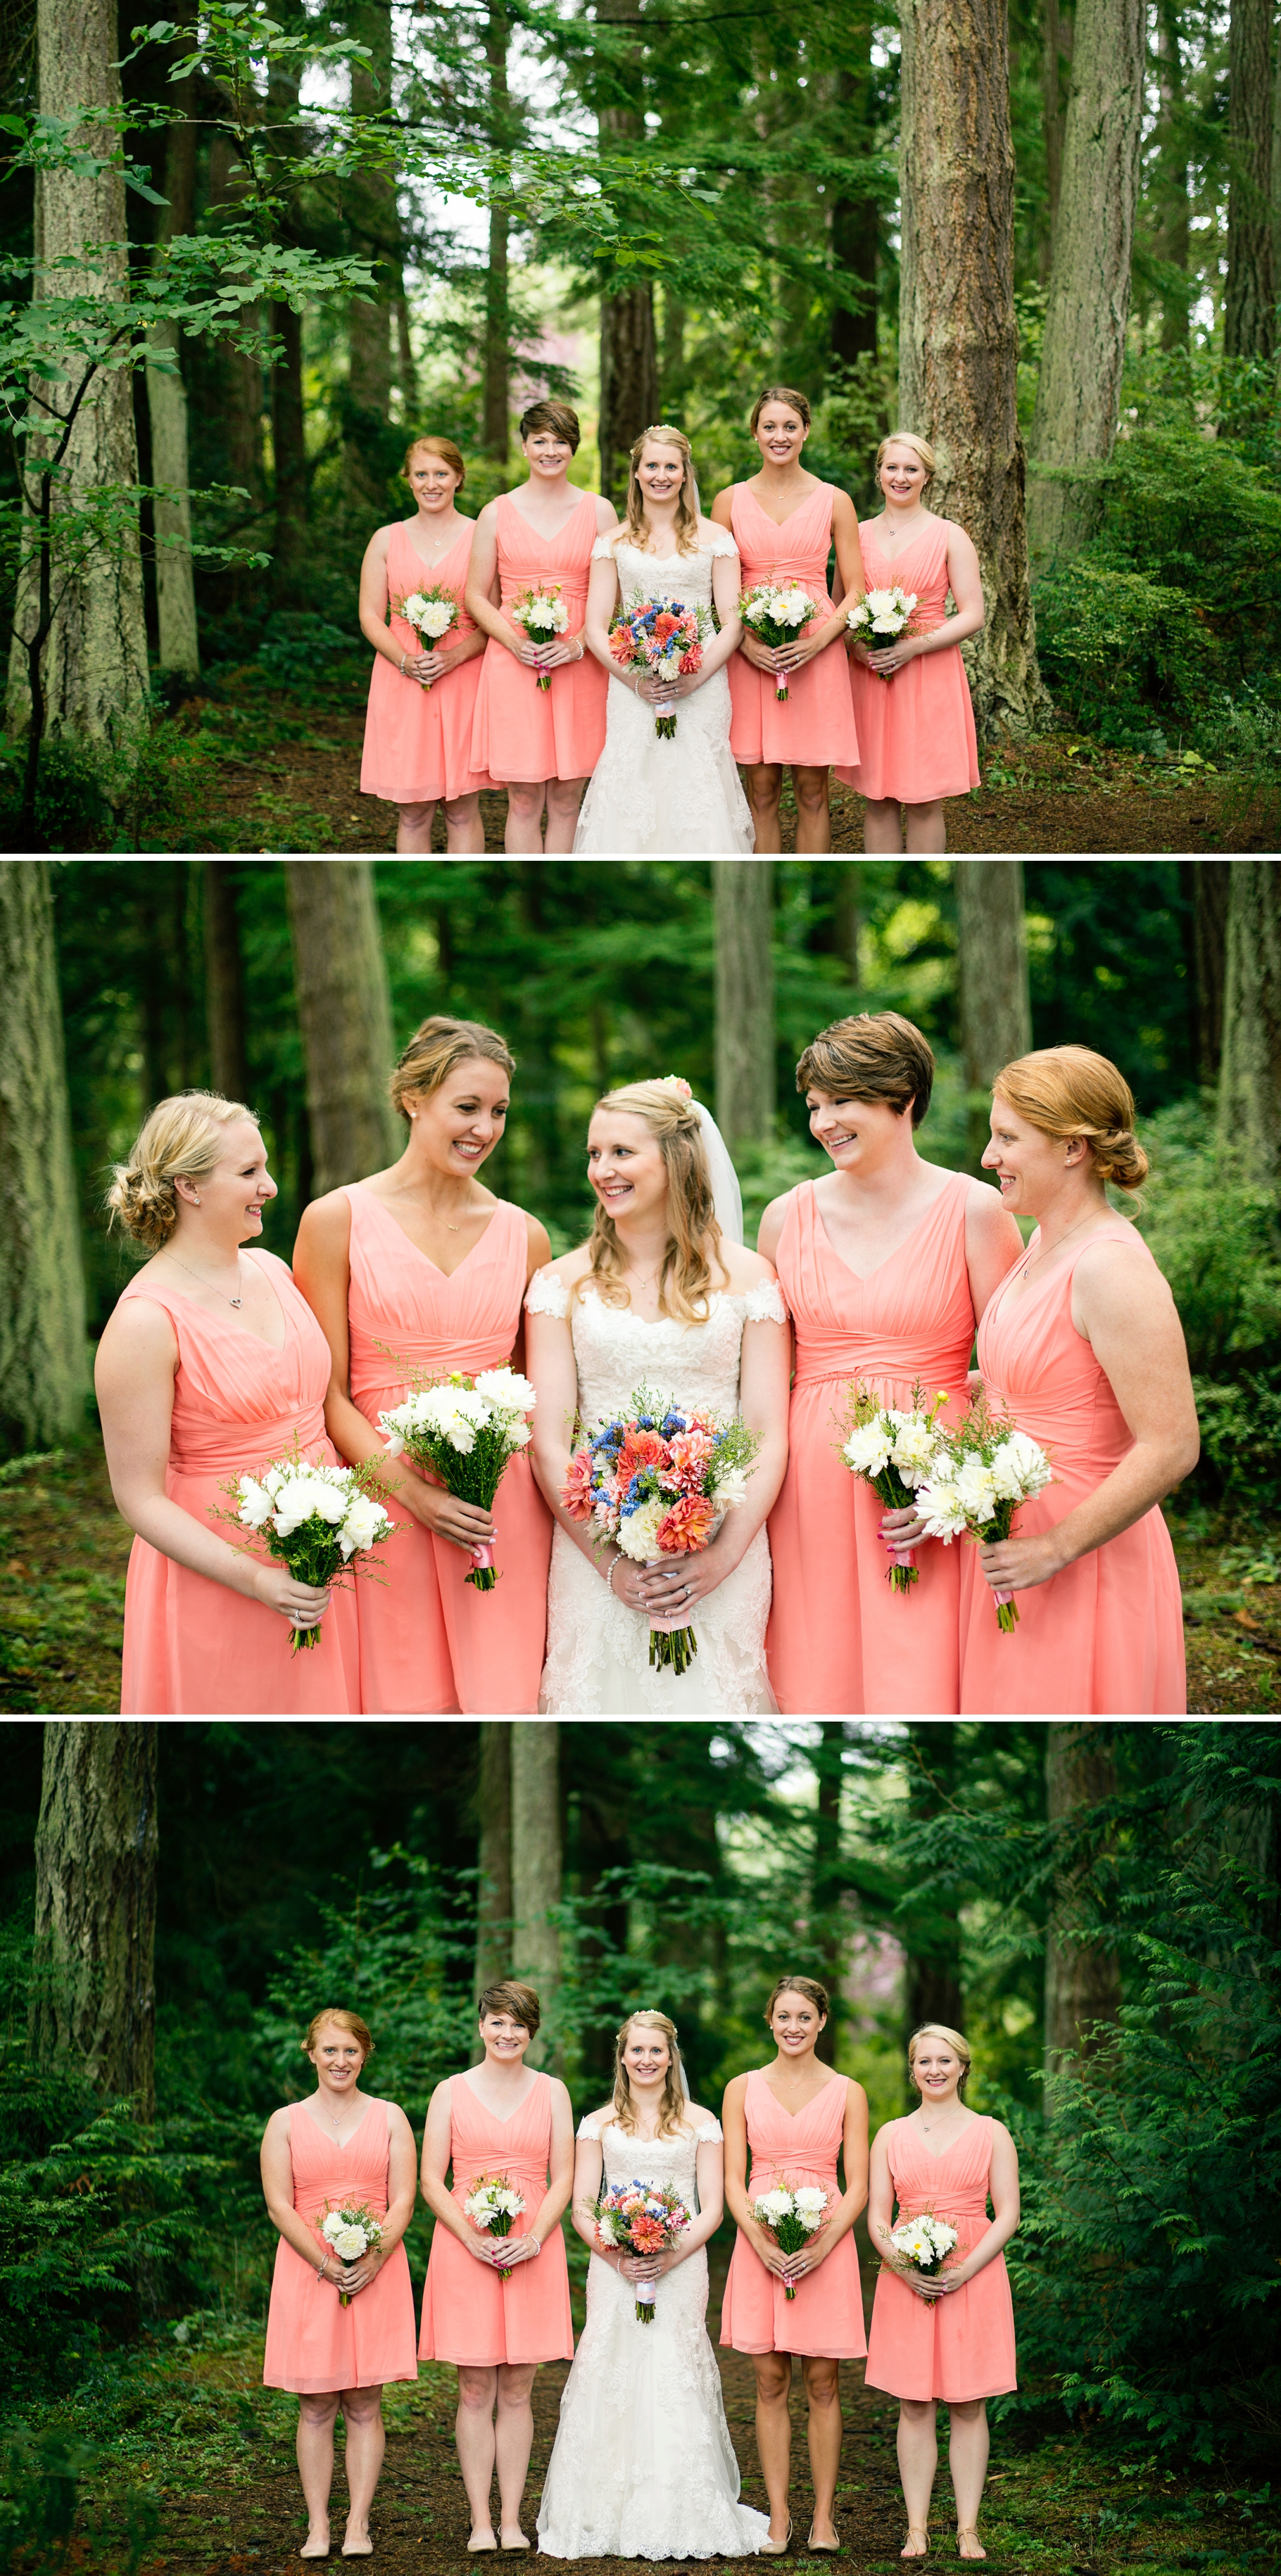 9-Bridesmaid-Portraits-Bridal-Bouquet-Flowers-Dahlias-Bride-wooded-bluff-olympic-mountains-log-cabin-Kitsap-Memorial-State-Park-Forest-Northwest-Photographer-Seattle-Wedding-Photography-by-Betty-Elaine